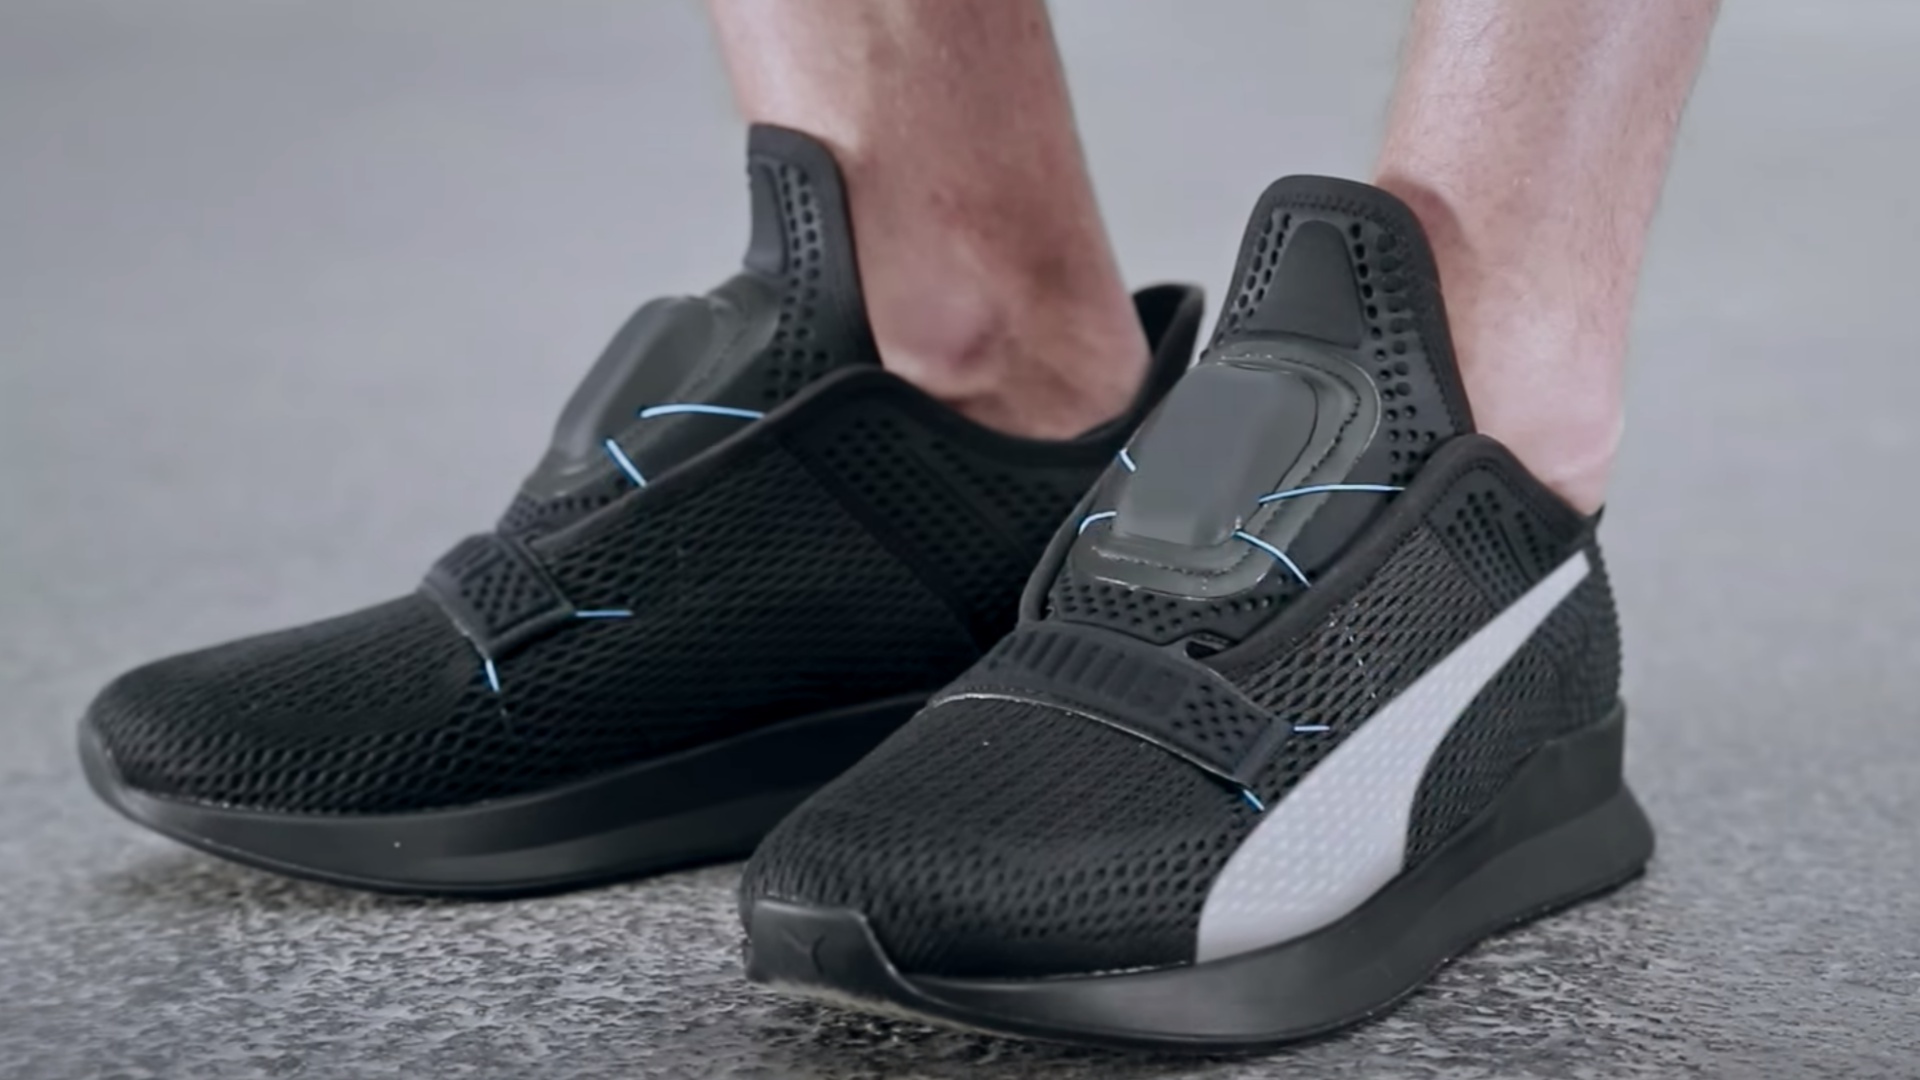 Puma enters self-lacing shoe game with 